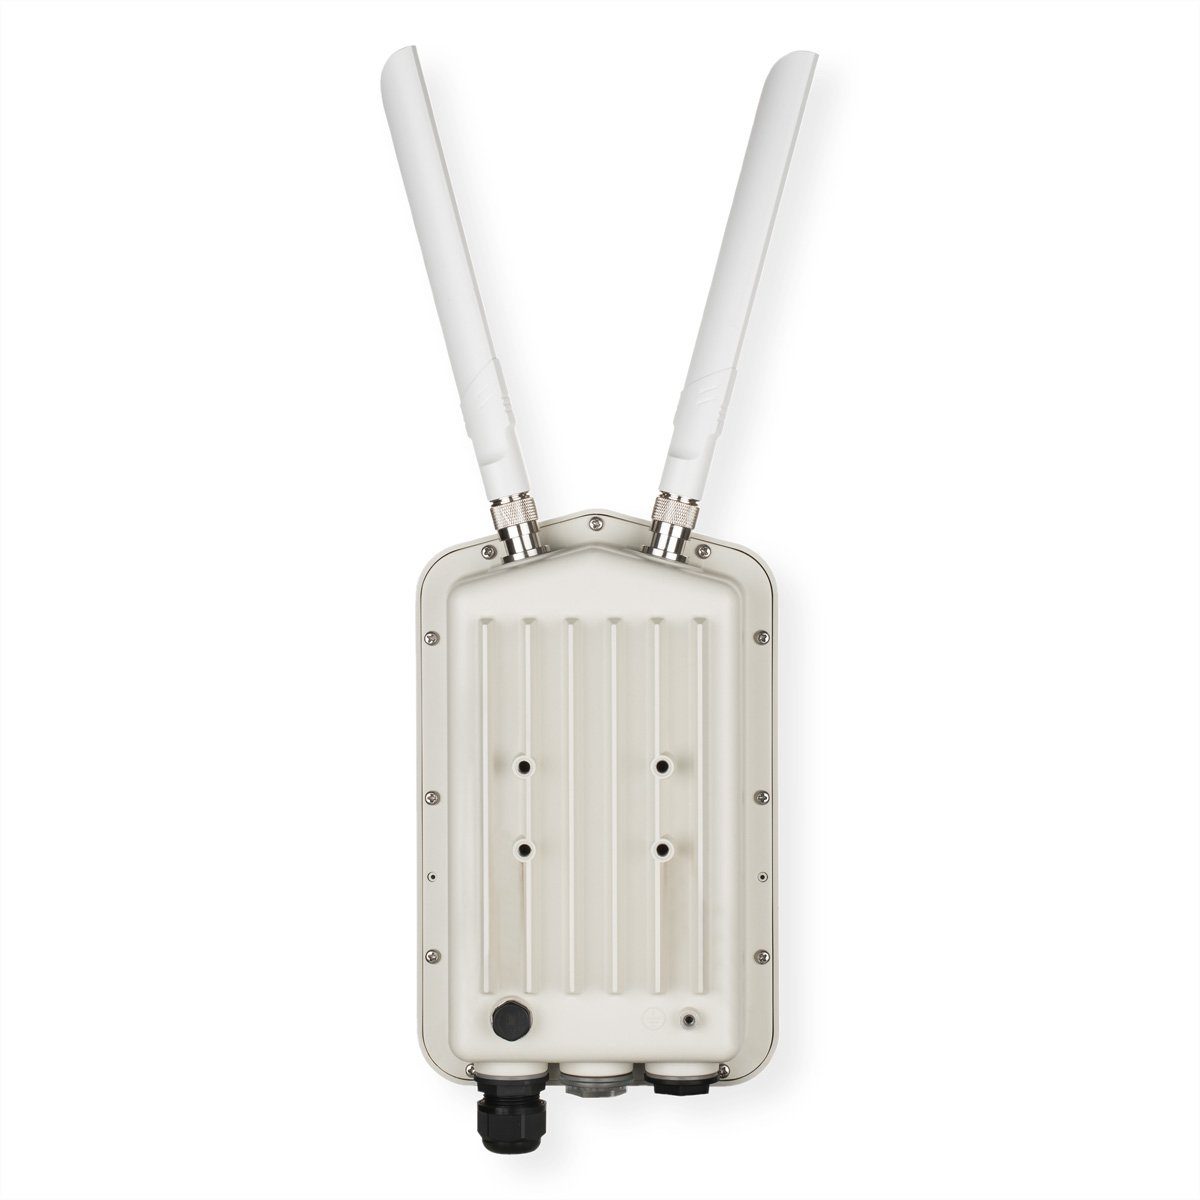 Wave Dual AC1300 Band 2 DWL-8720AP Point D-Link WLAN-Repeater Access Unified Outdoor